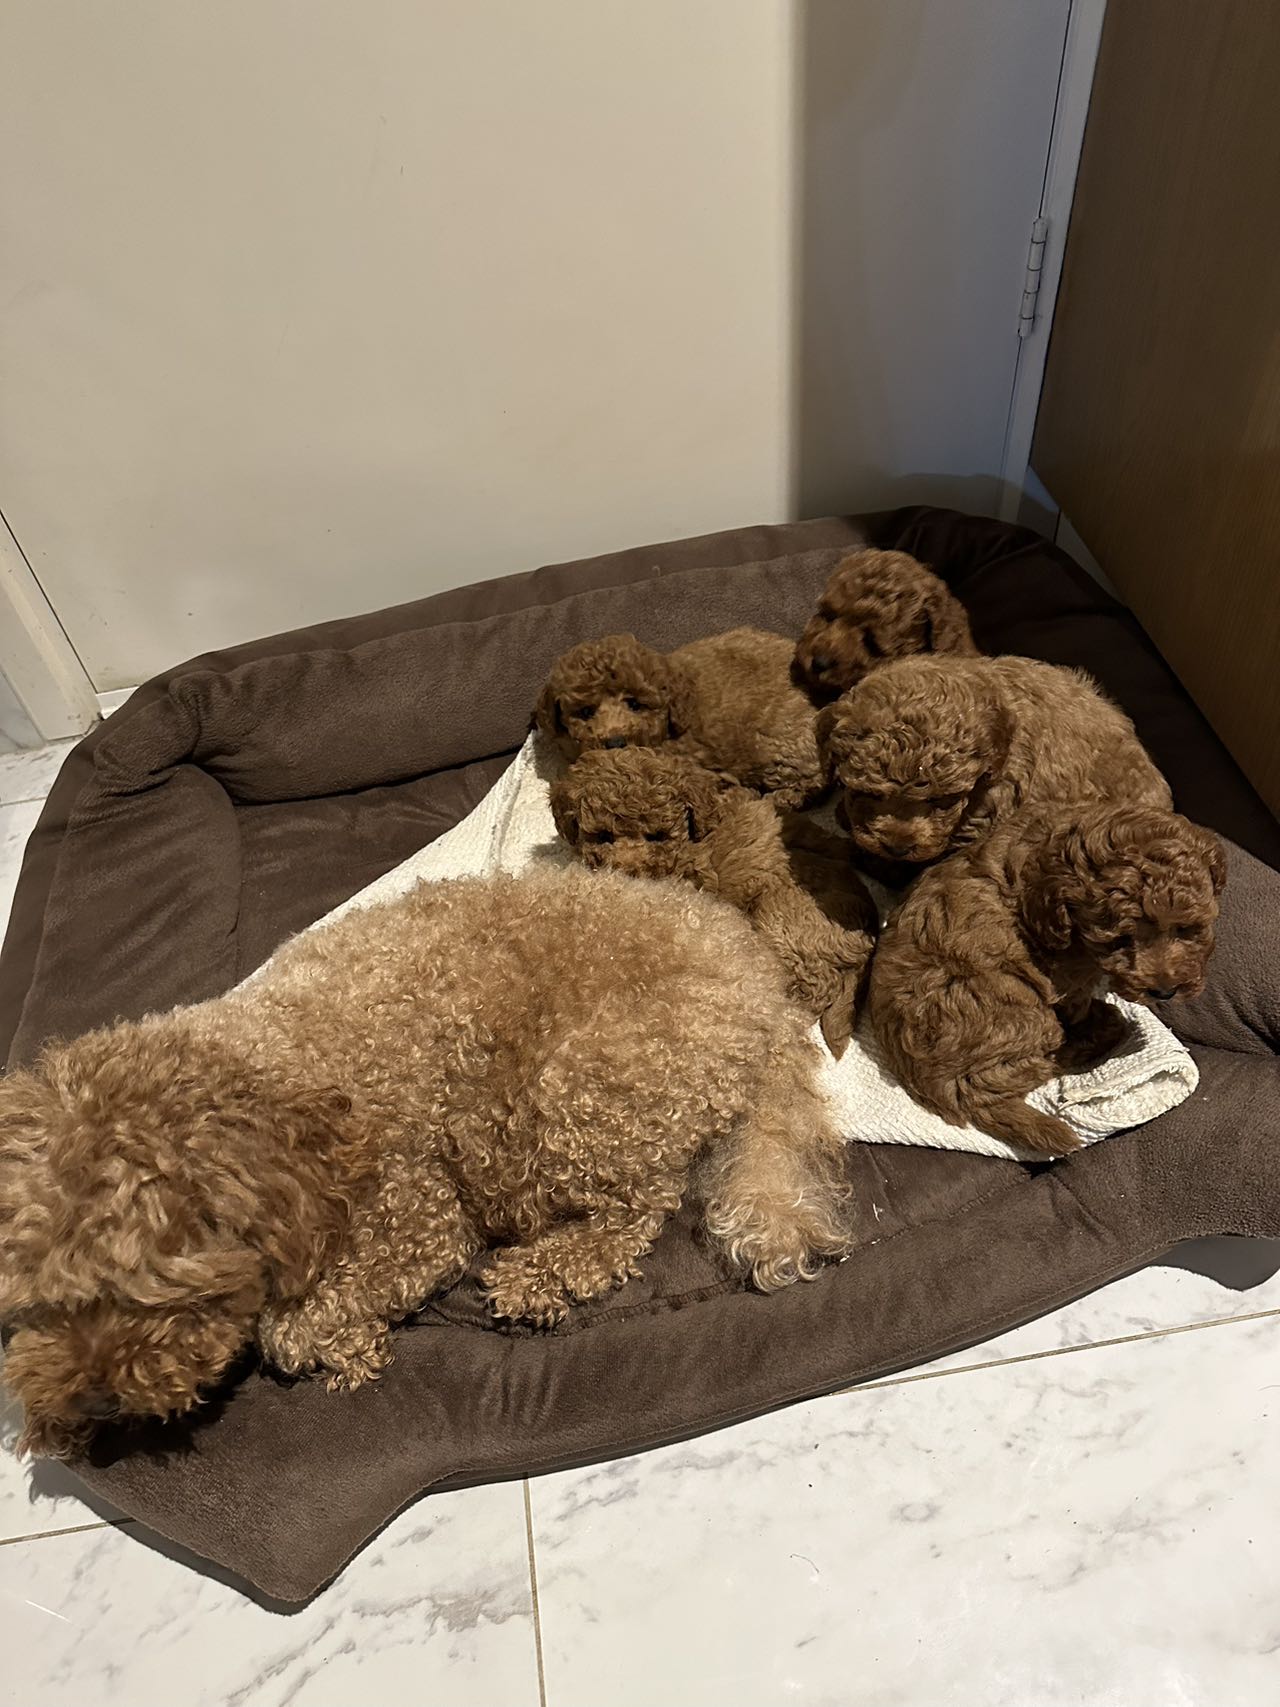 Adorable Purebred Toy Poodle Puppies for Sale - Ready to Go Home!